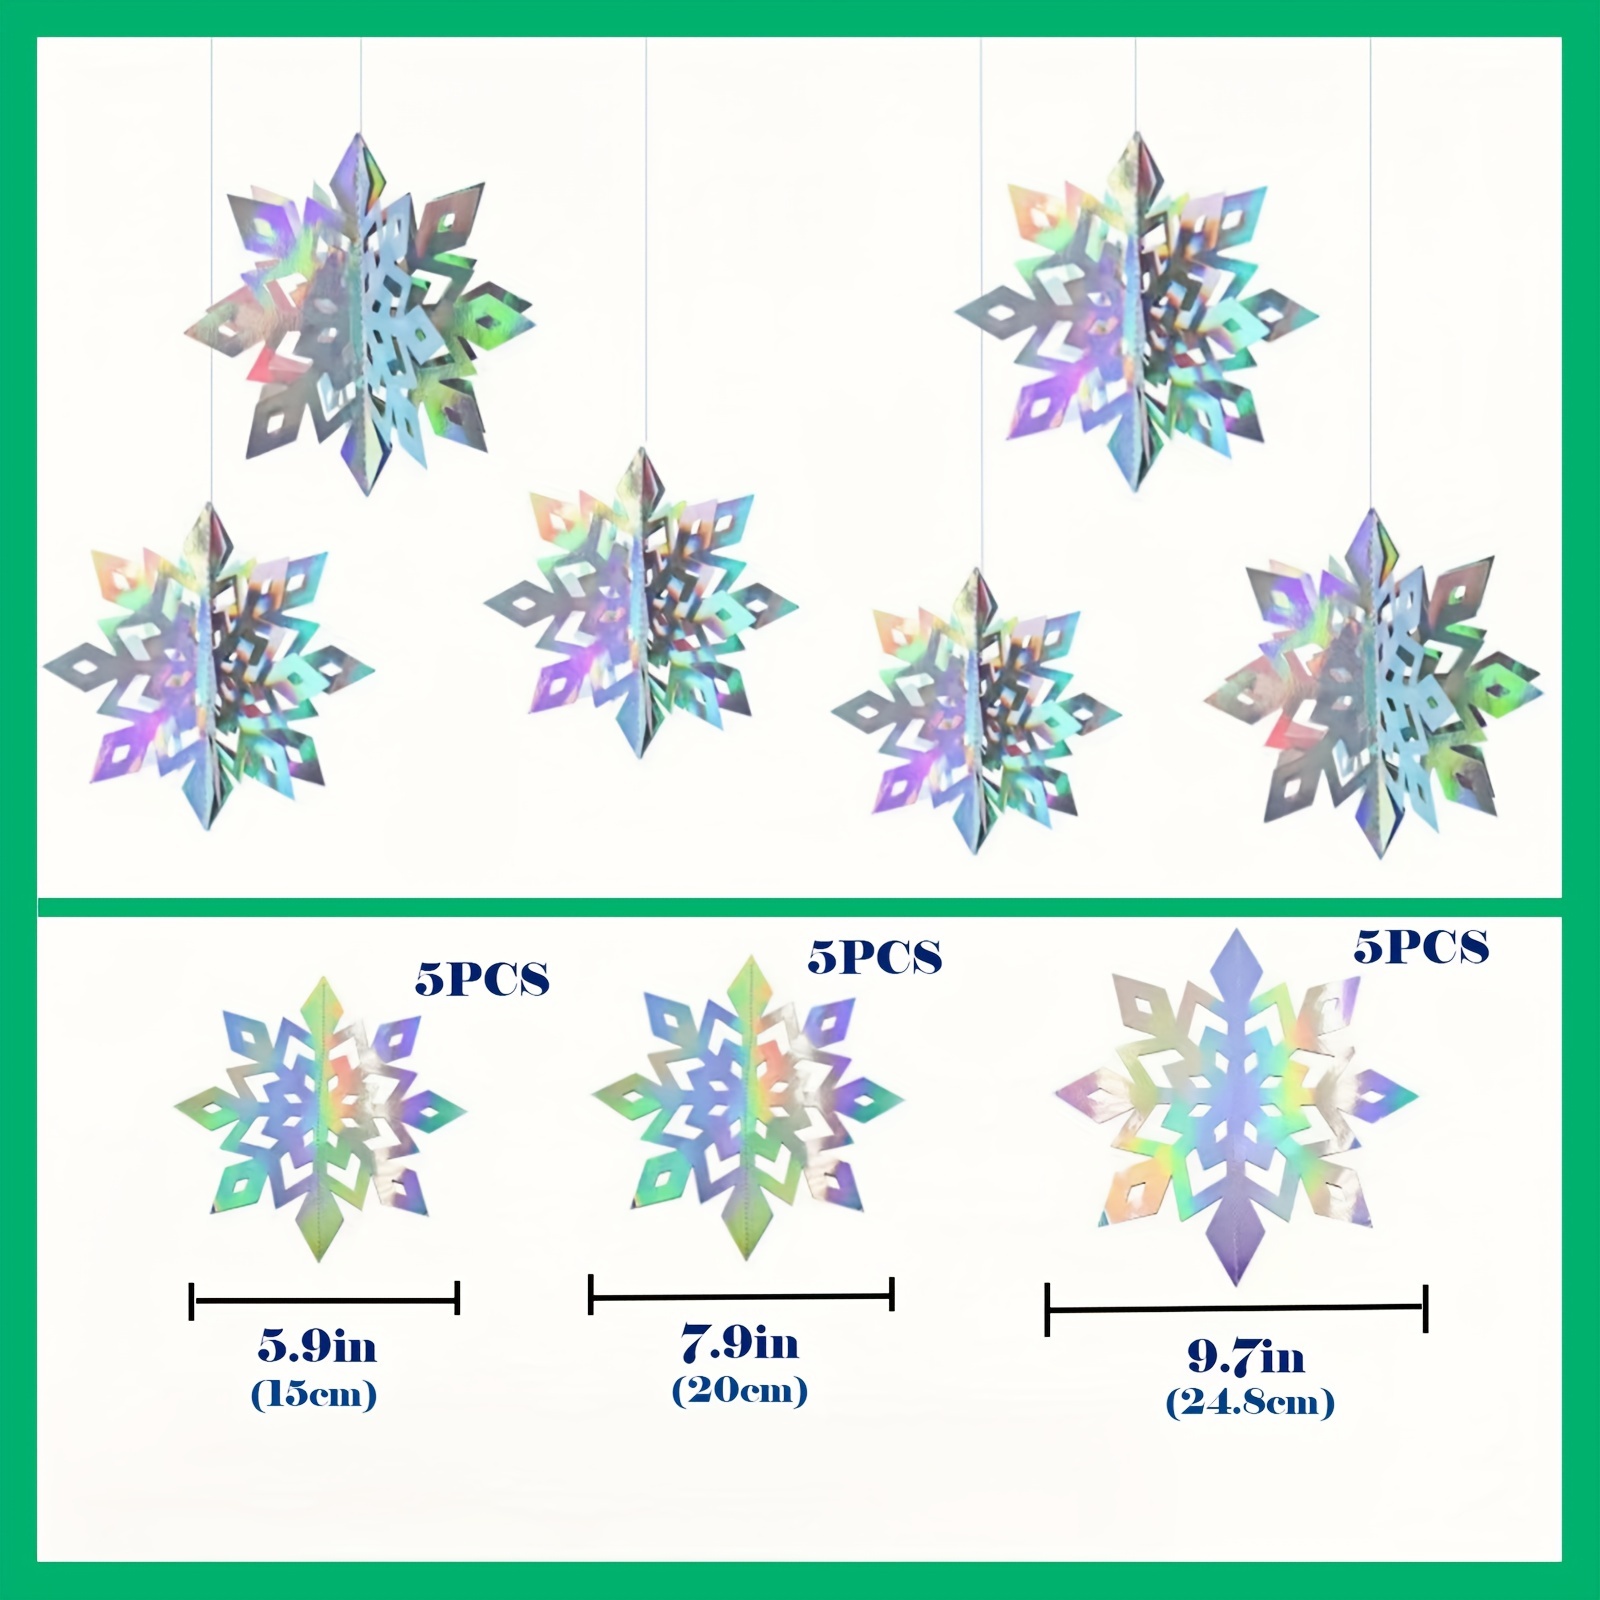 15 Pack Christmas Hanging Snowflakes Decorations 3D Iridescent